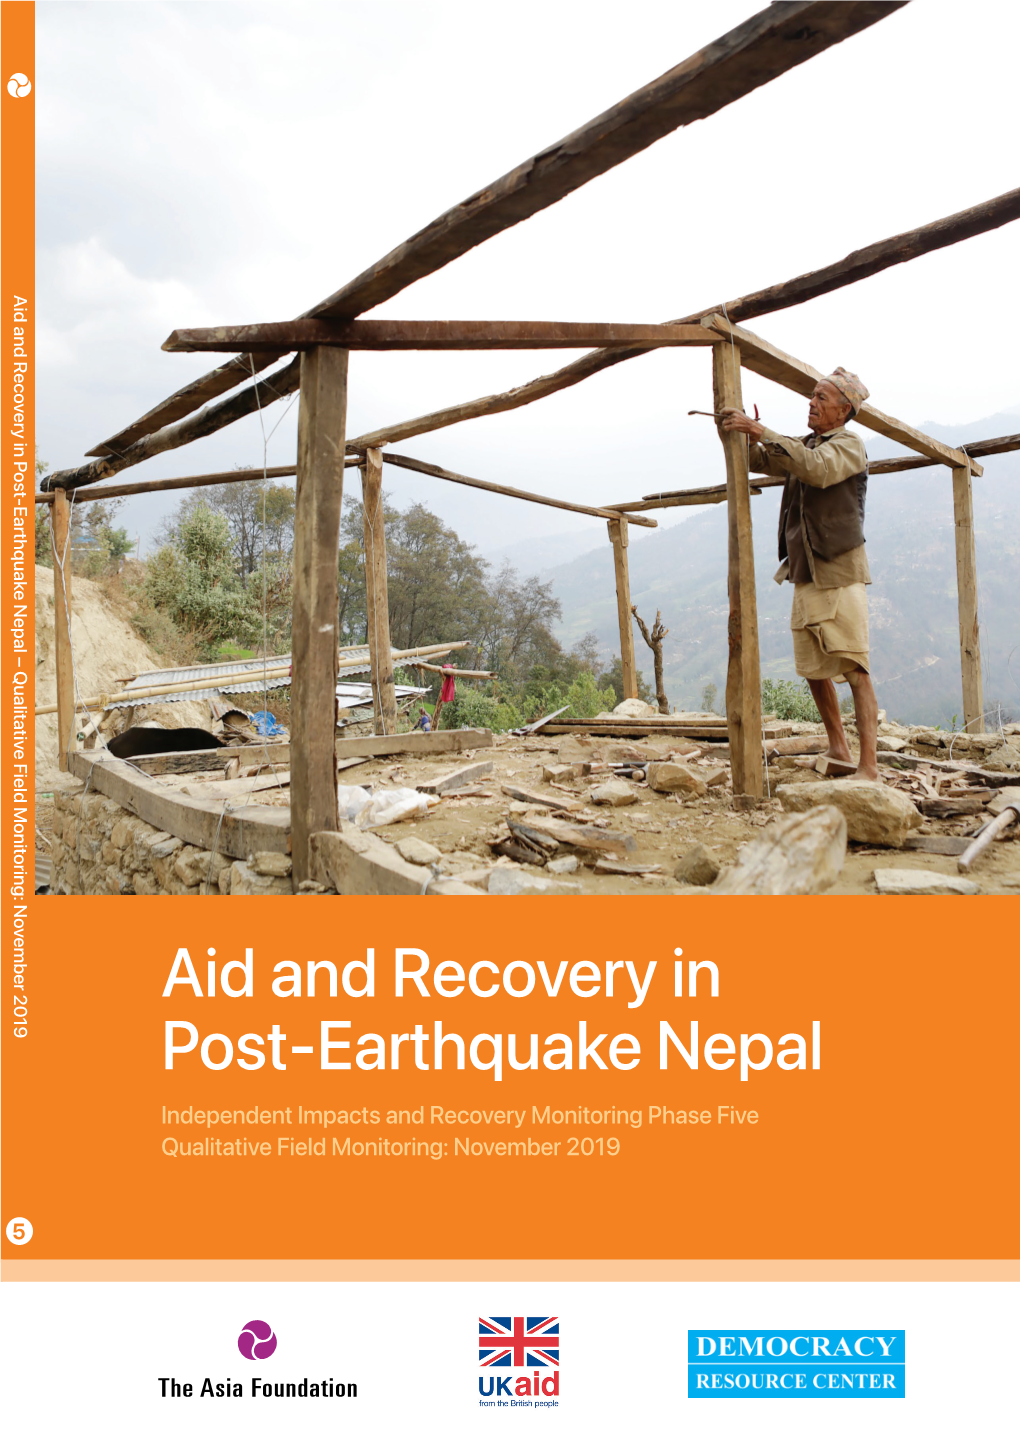 Aid and Recovery in Post-Earthquake Nepal